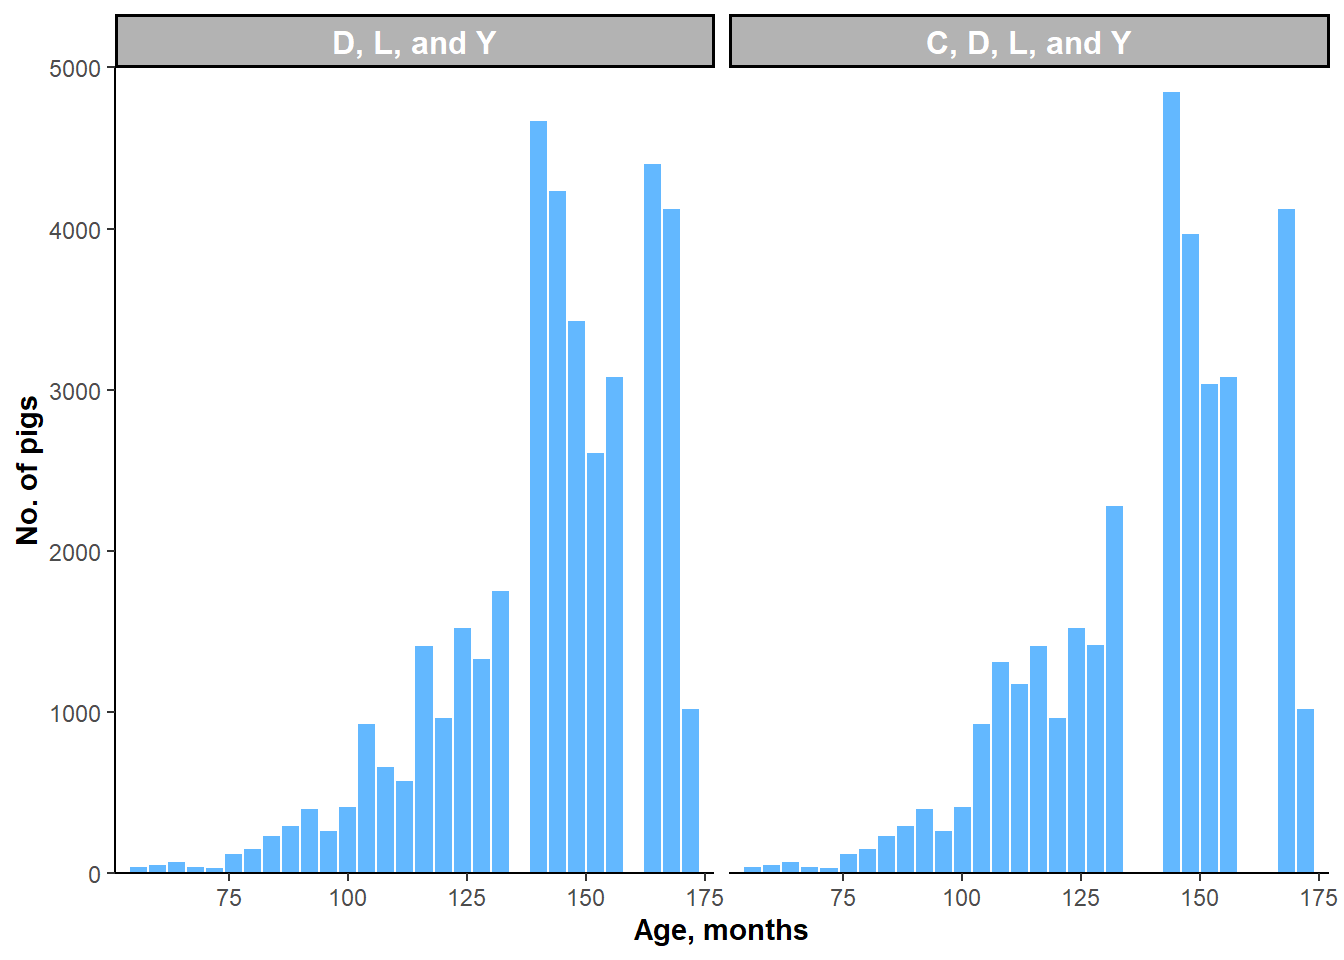 Histograms of AGE by subgroups of three or more breeds.